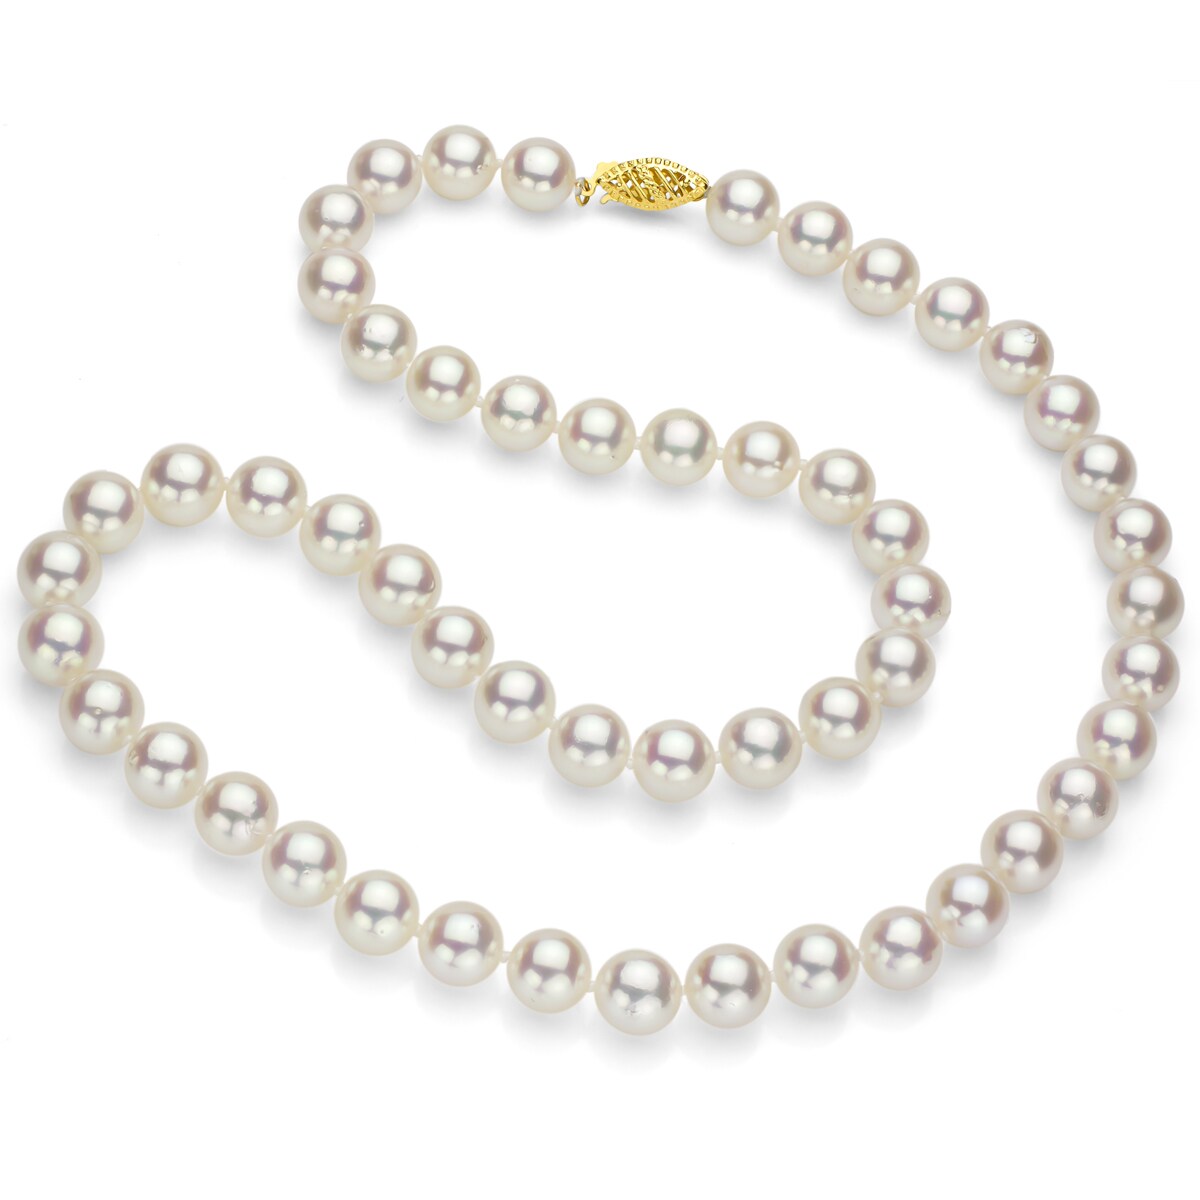 7.0-8.0mm High Luster White Freshwater Cultured Pearl necklace 22 with Four leaf flower 